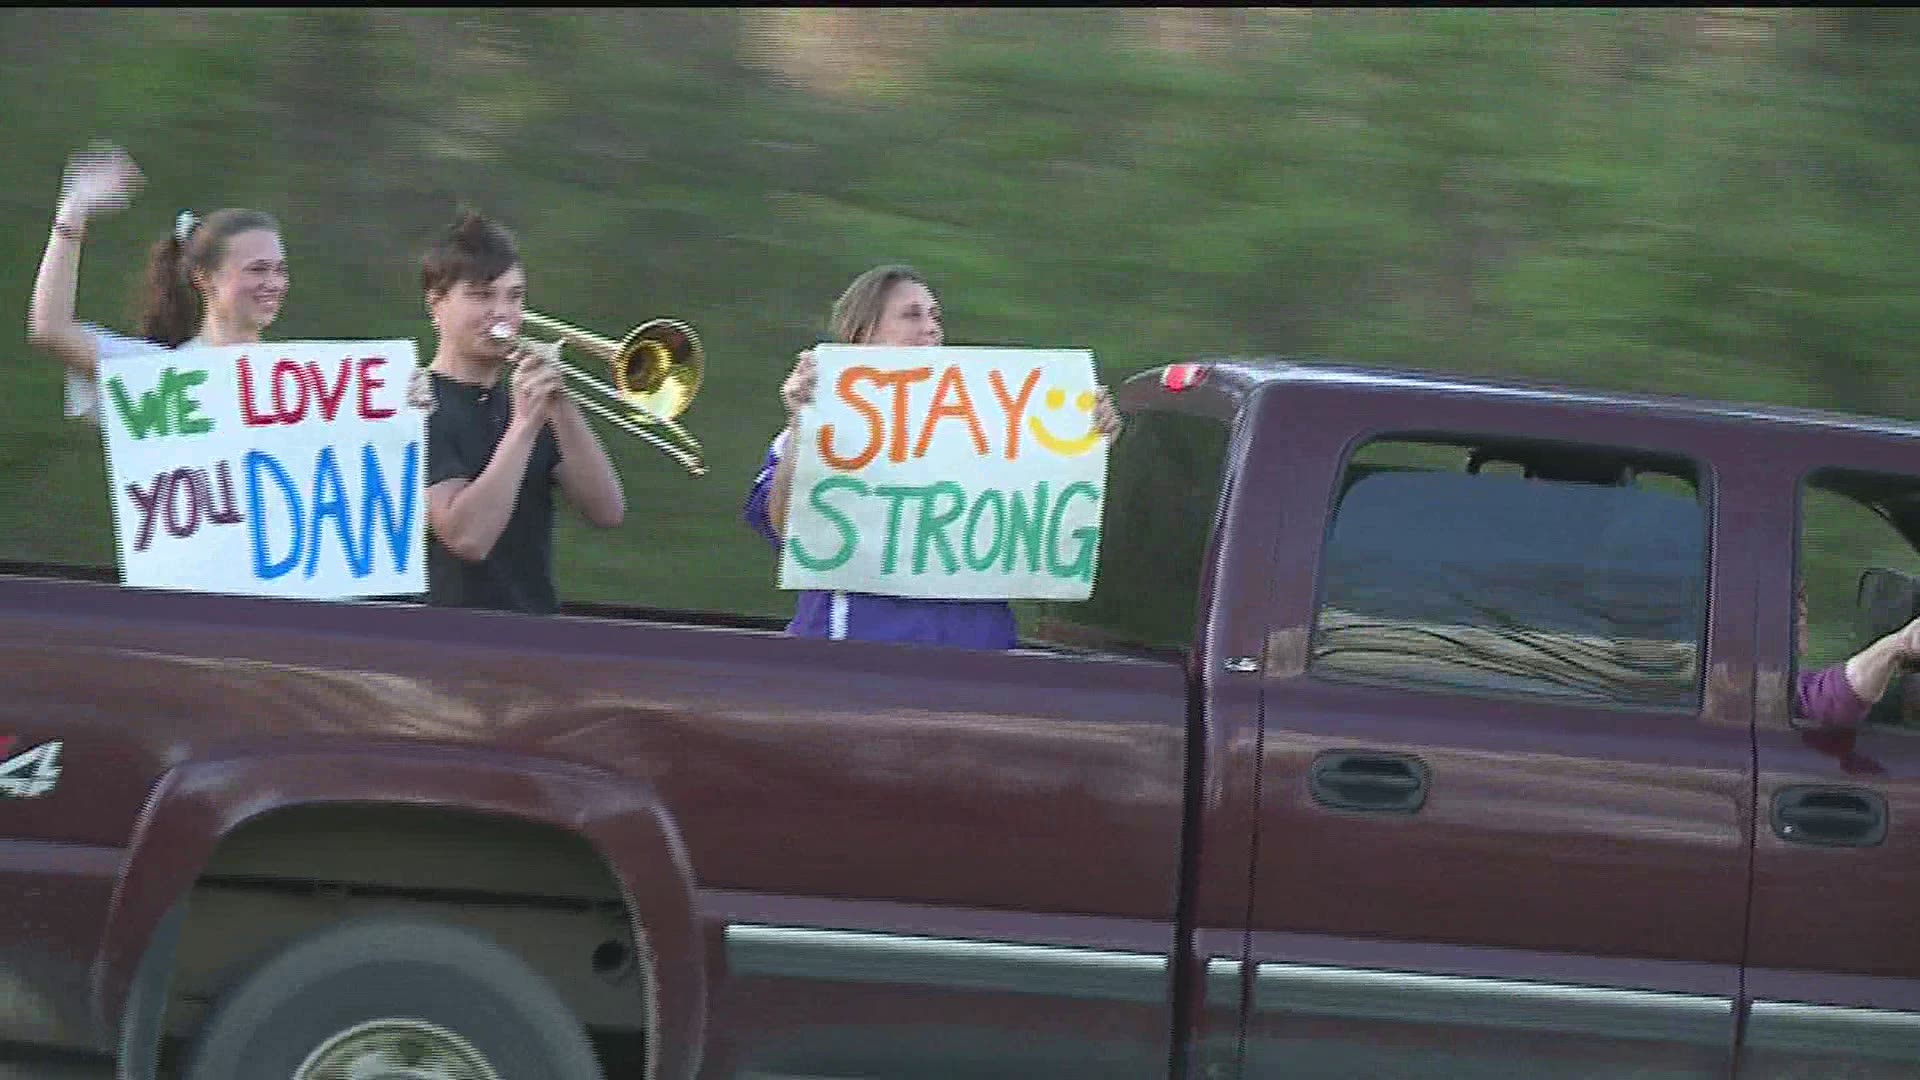 Dozens of people came out to raise the spirits of a former York County high school teacher who is battling cancer.